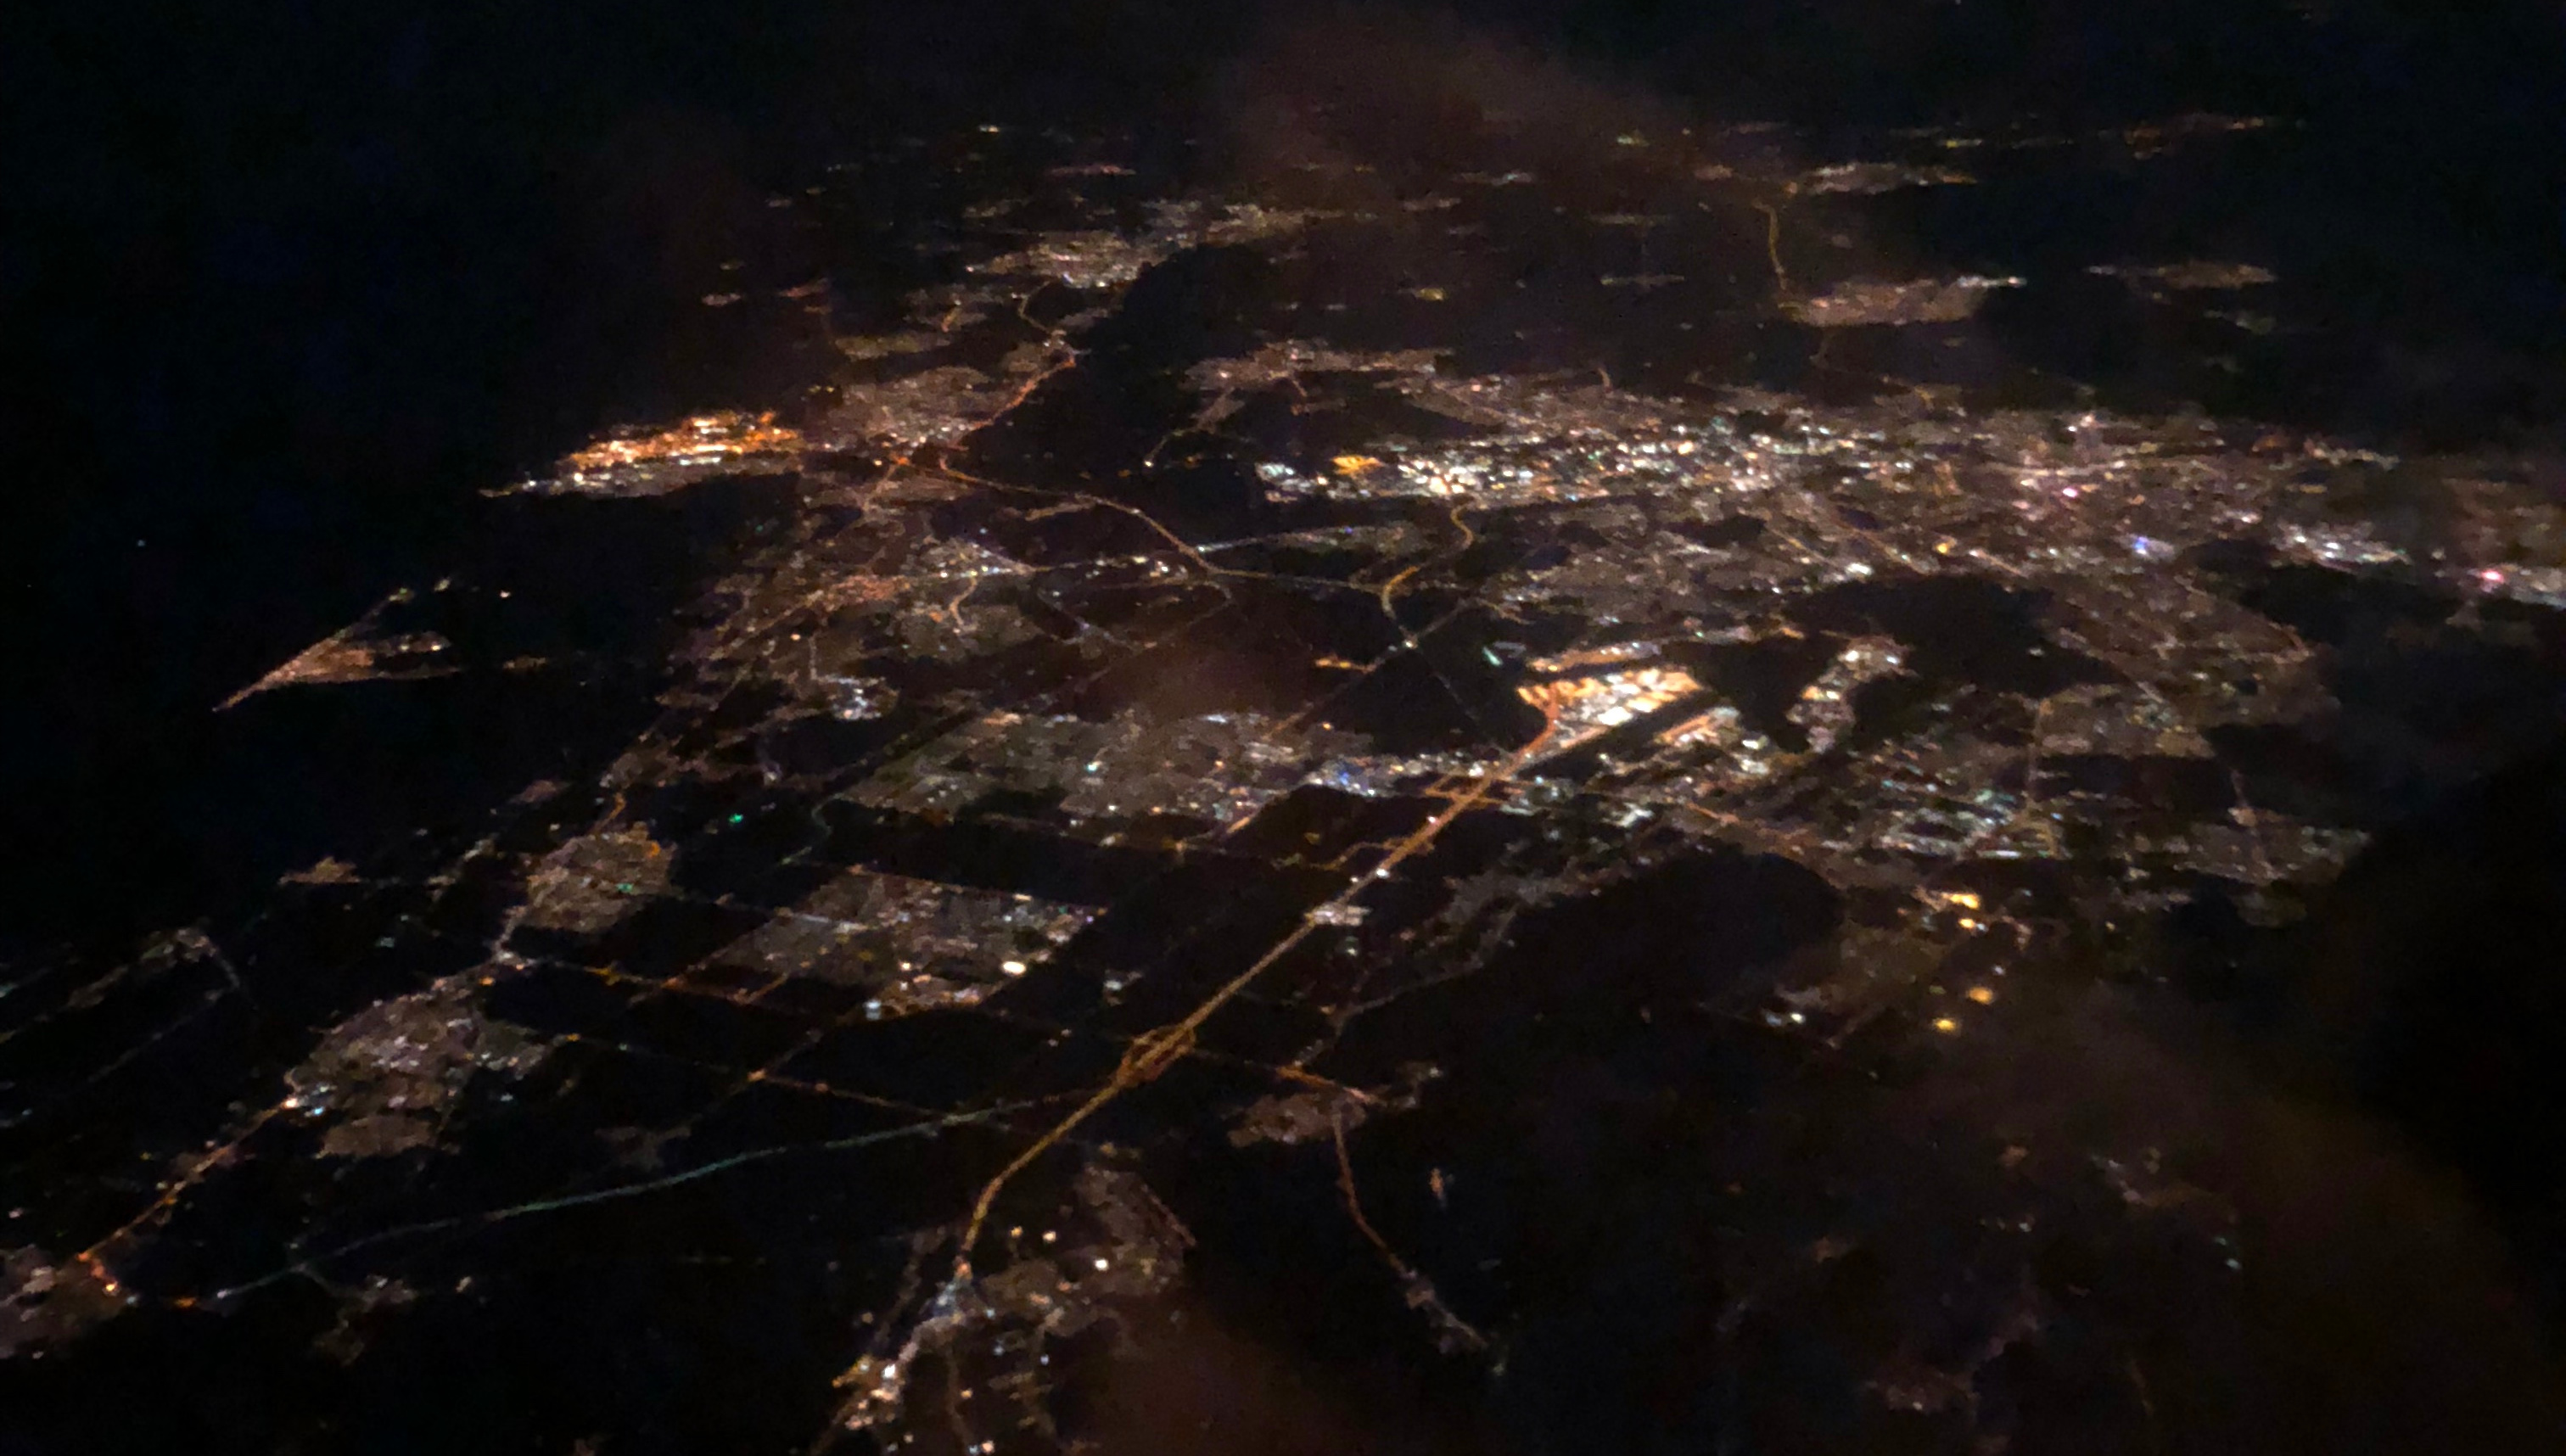 A pictures of some town near Berlin, taken from an aeroplane at night.